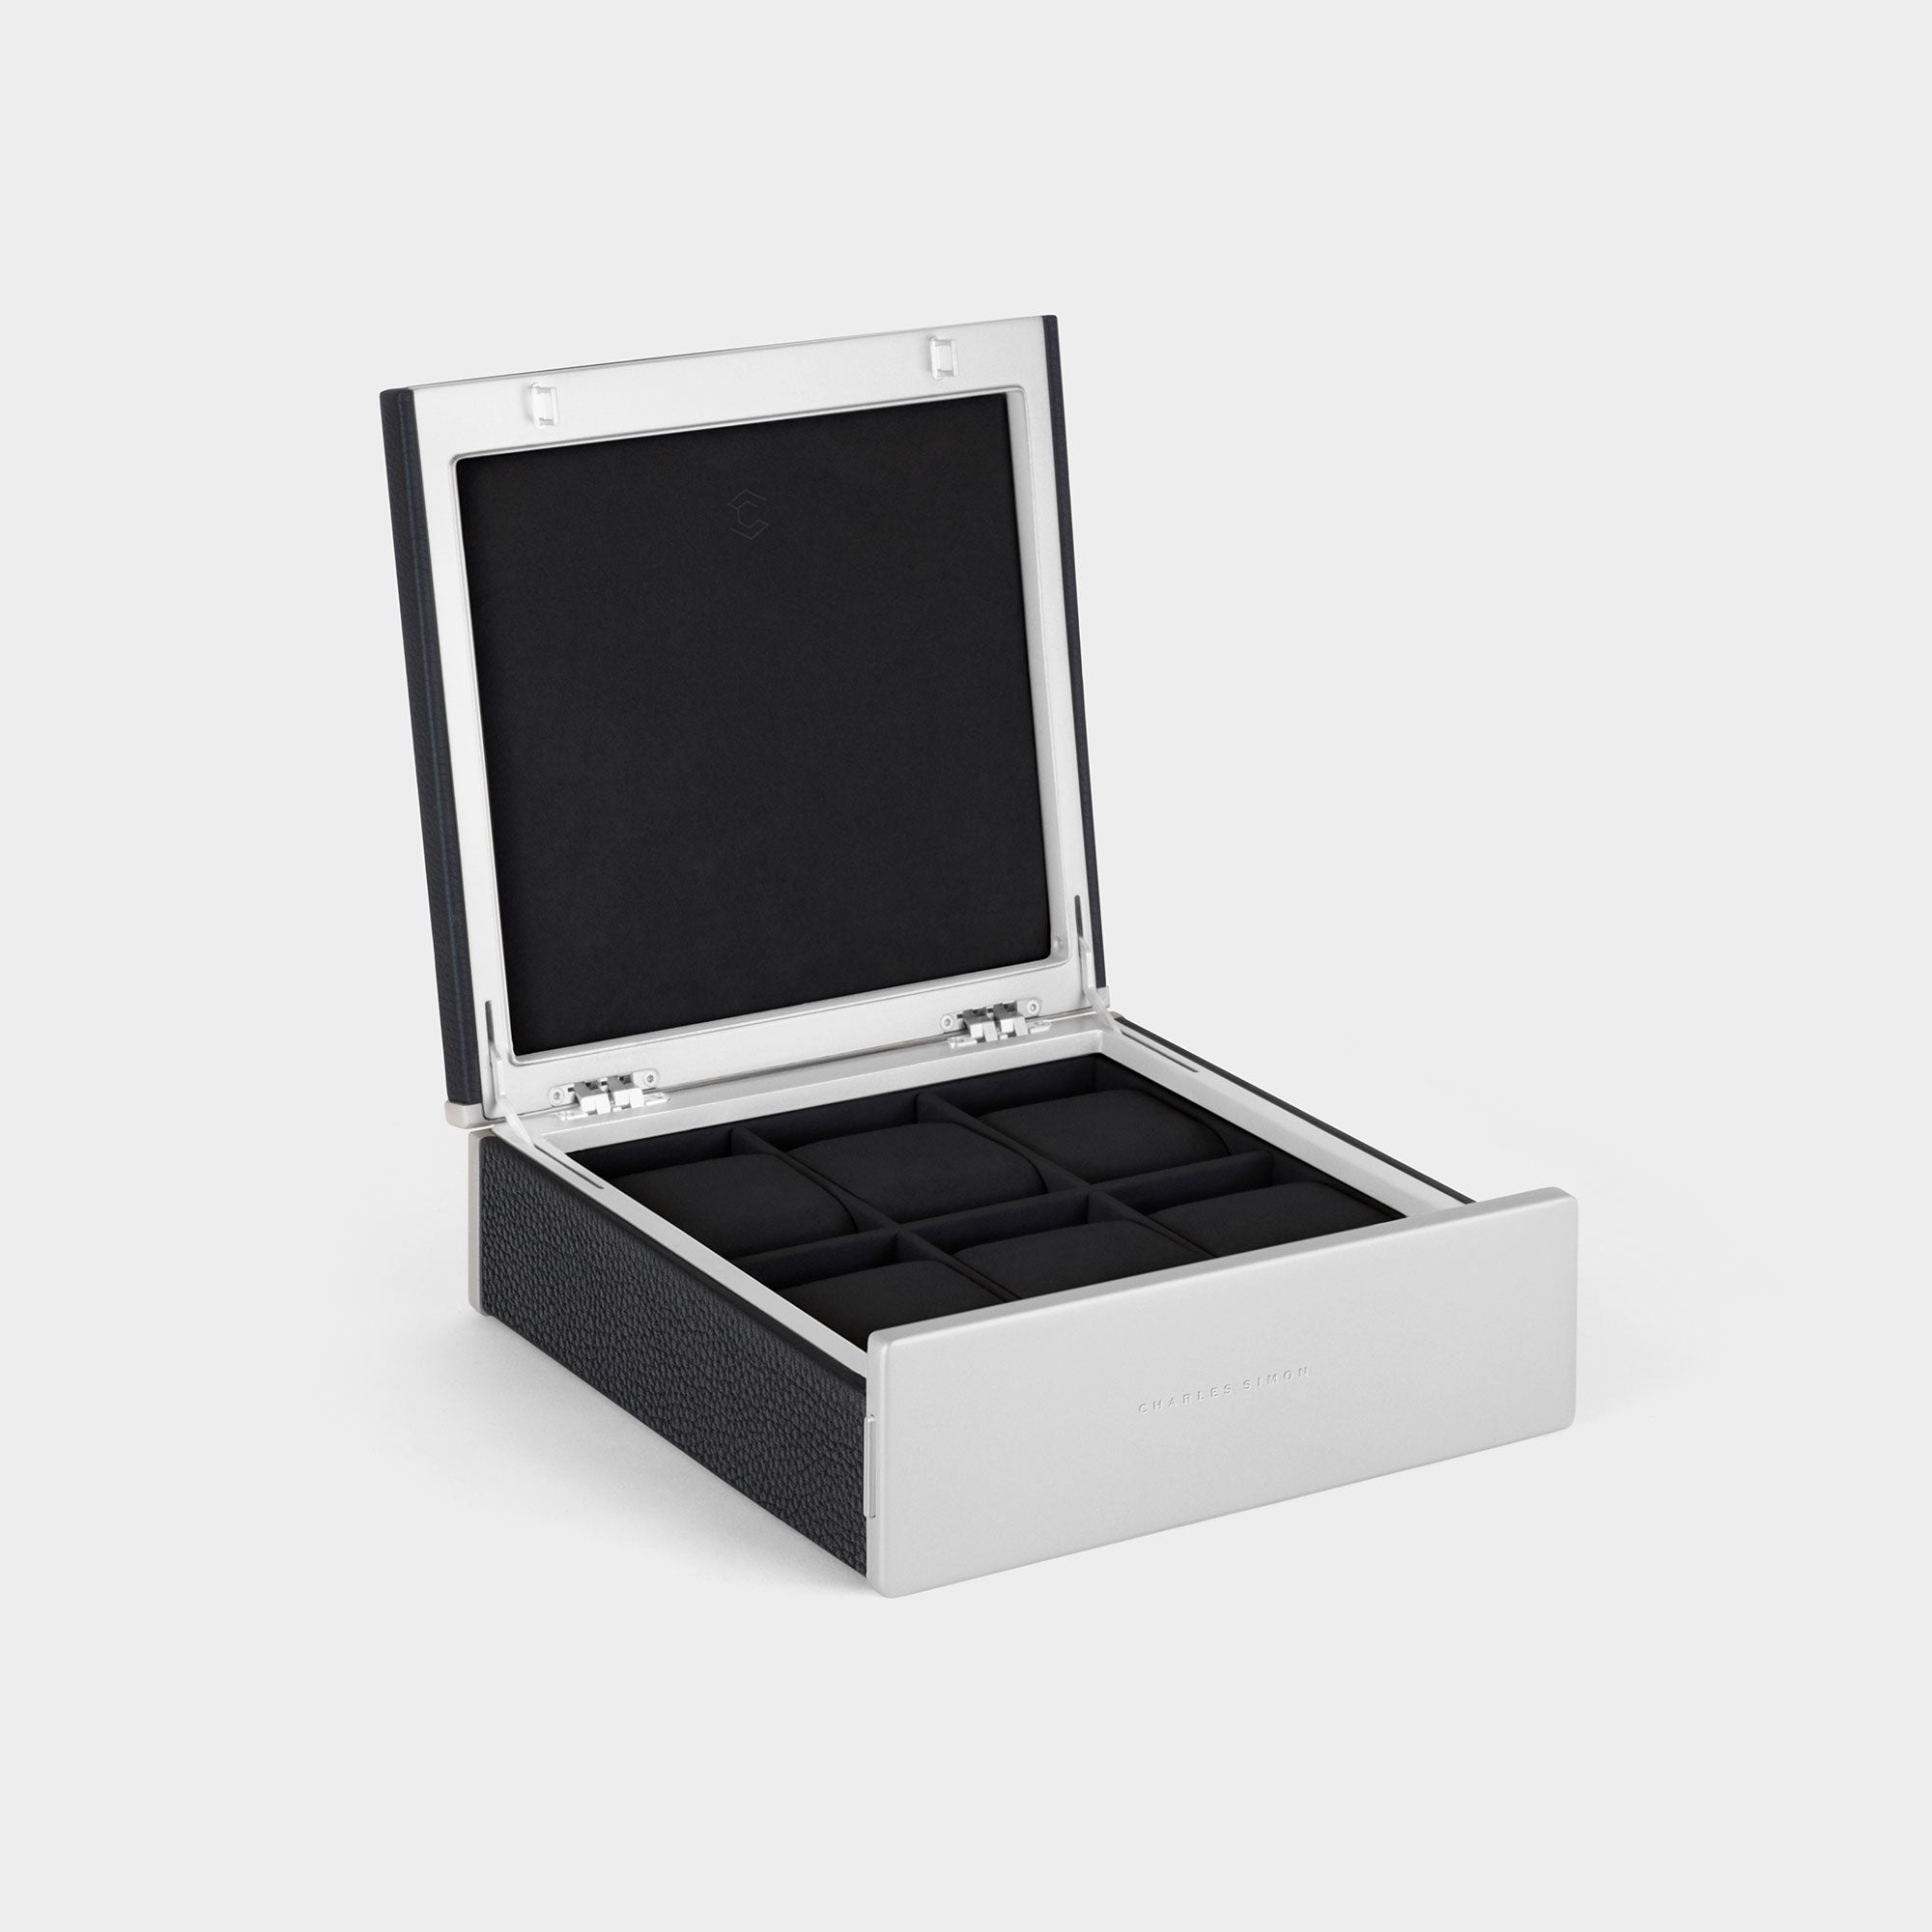 Handmade watch box for 6 watches in black leather, carbon fiber and anodized aluminum casing and Alcantara interior